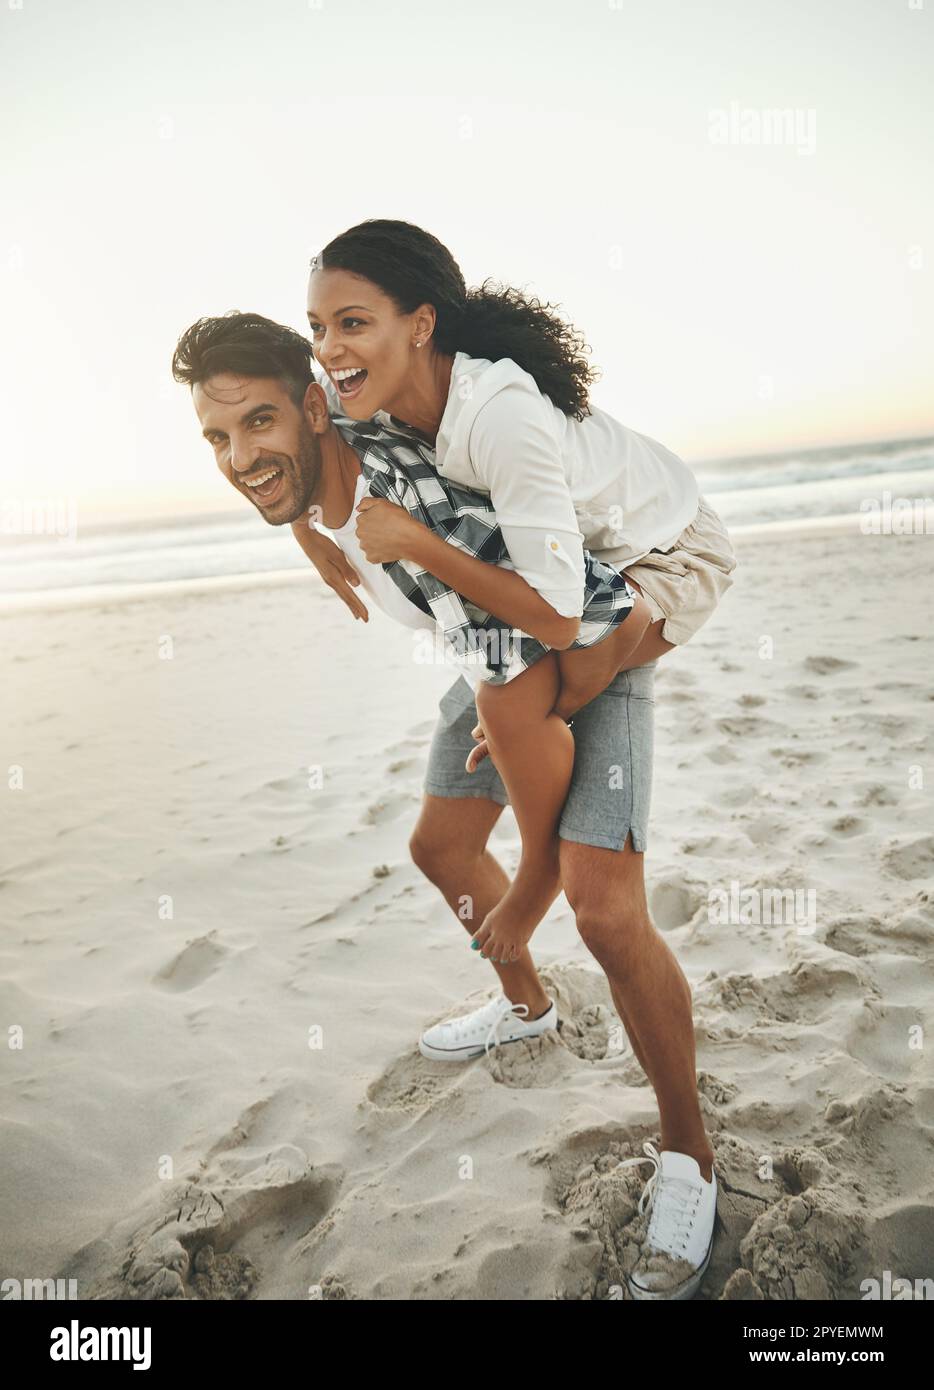 Love makes the world go round. a young man piggybacking his girlfriend while spending the day at the beach. Stock Photo